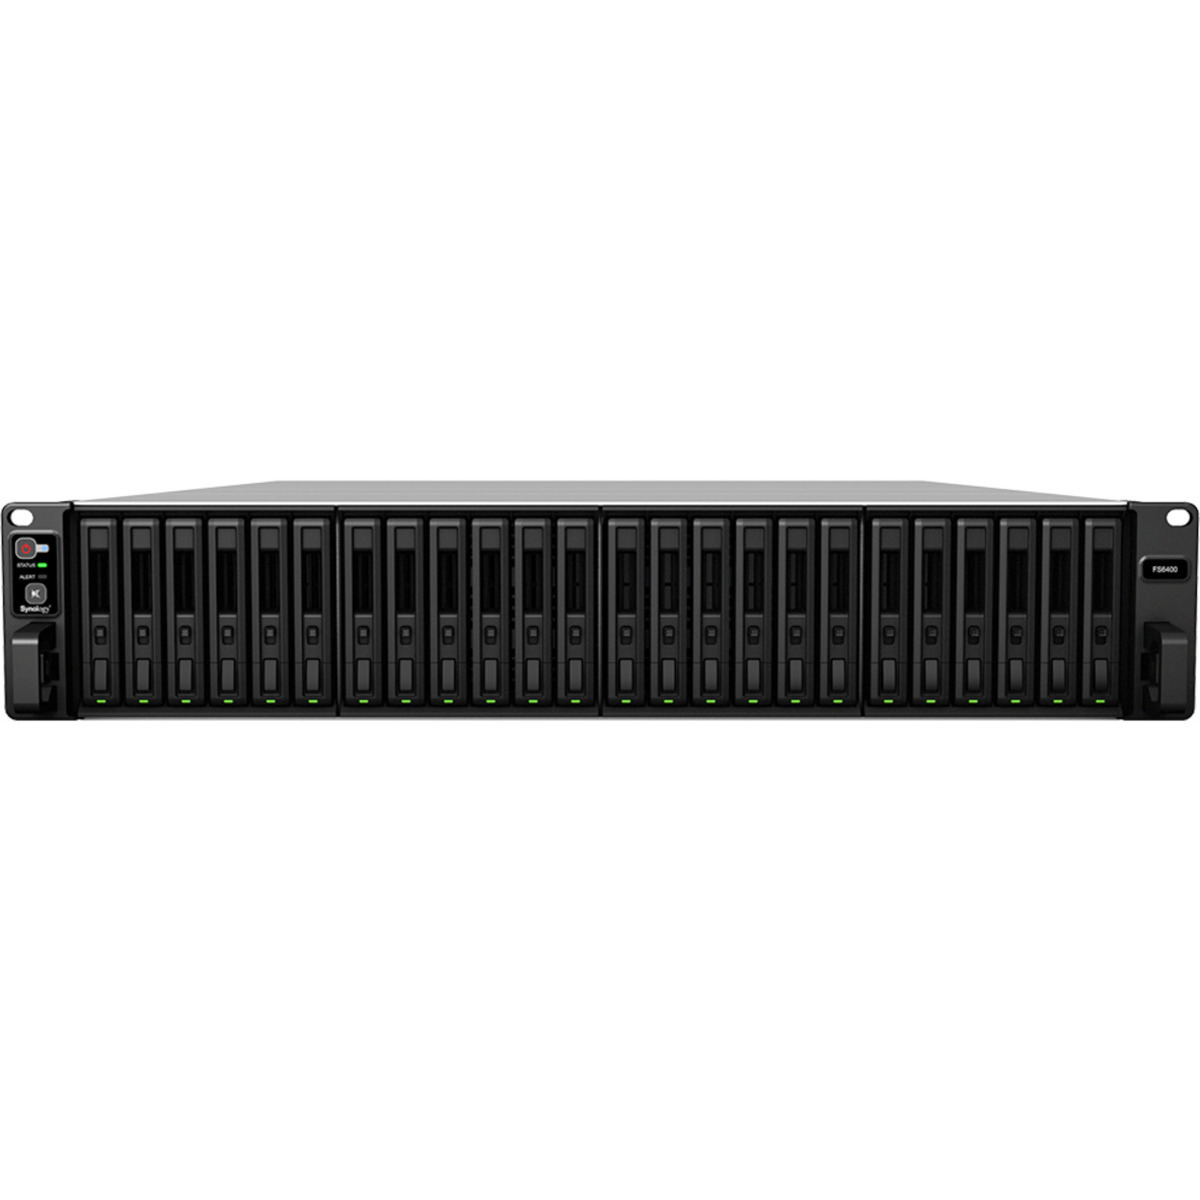 buy $35834 Synology FlashStation FS6400 192tb RackMount NAS - Network Attached Storage Device 24x8000gb Samsung 870 QVO MZ-77Q8T0 2.5 SATA 6Gb/s SSD CONSUMER Class Drives Installed - Burn-In Tested - nas headquarters buy network attached storage server device das new raid-5 free shipping usa christmas new year holiday sale FlashStation FS6400